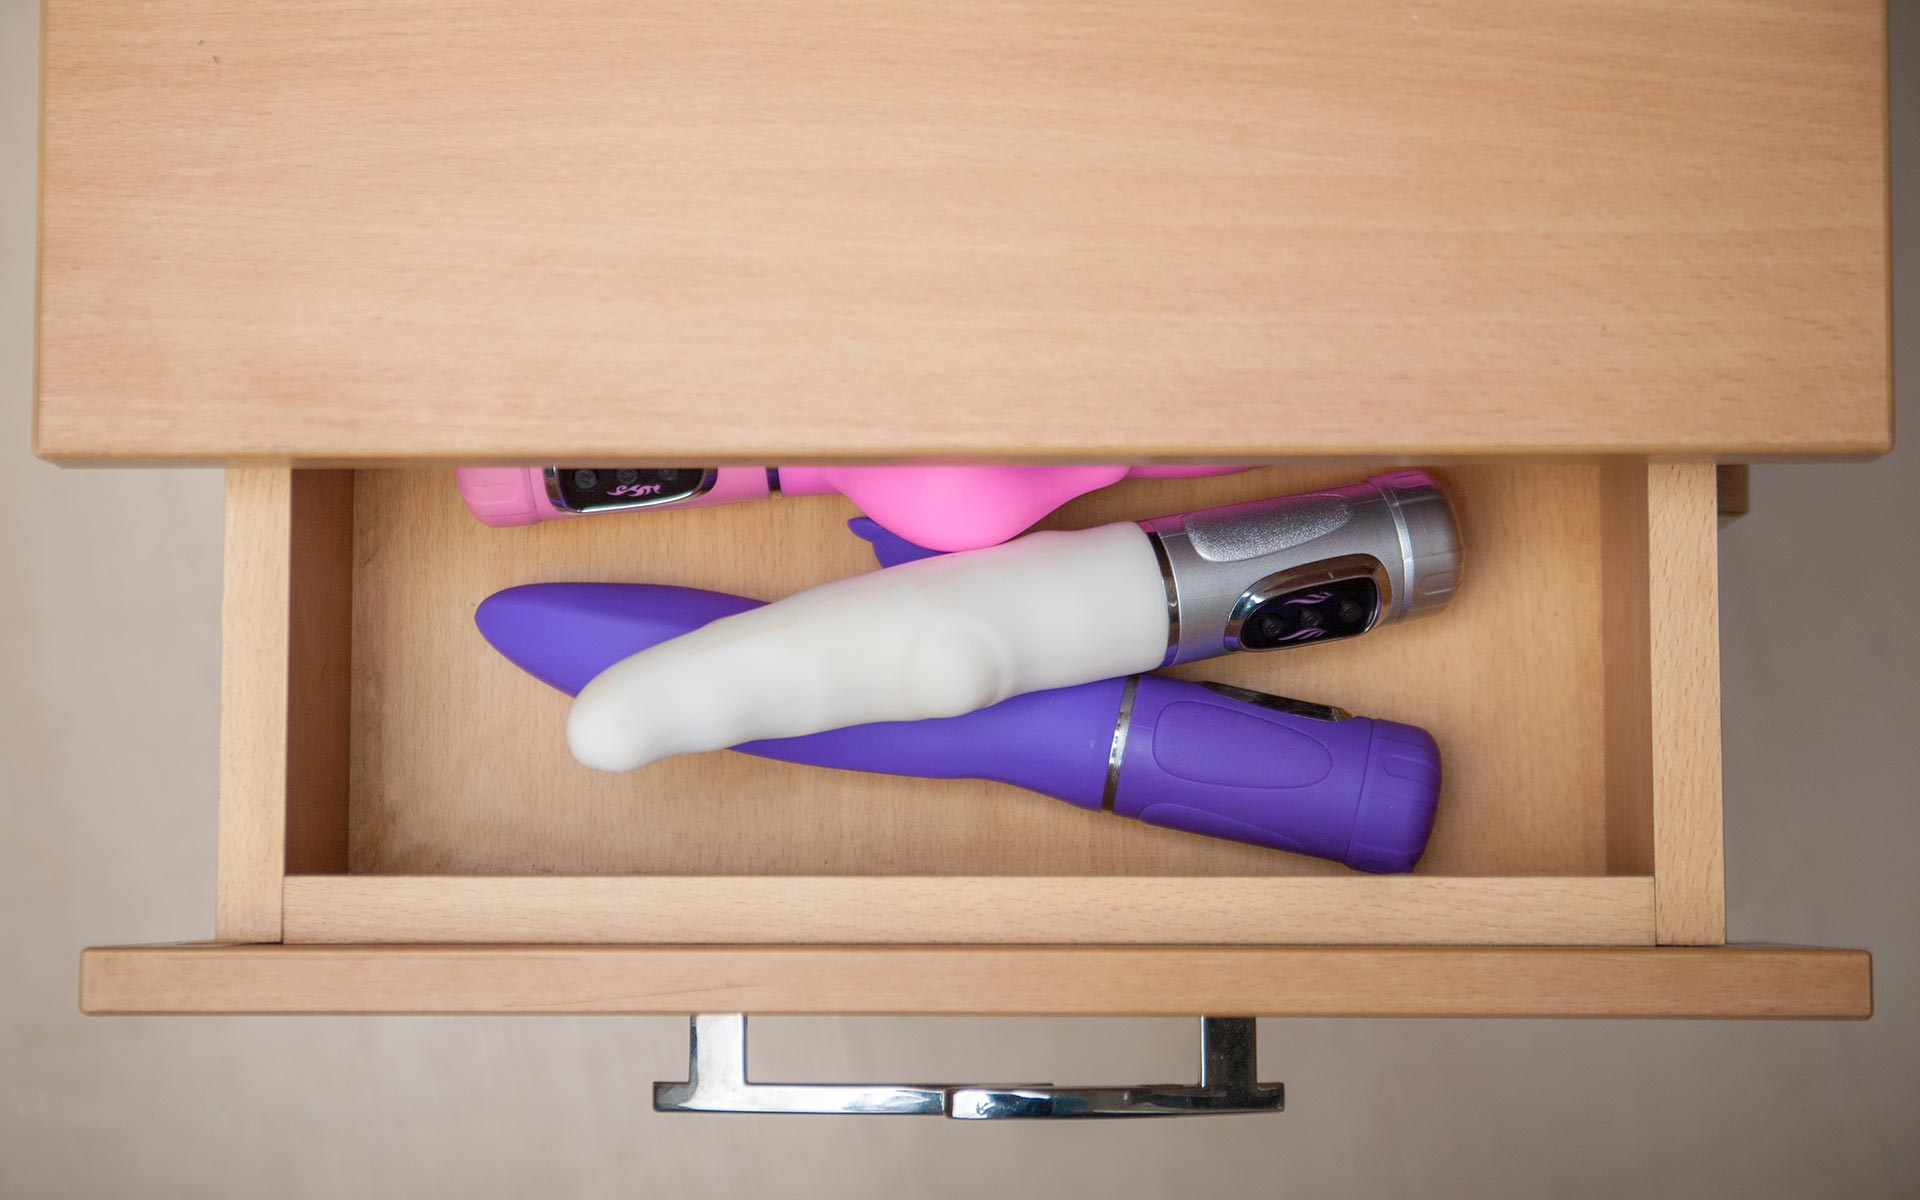 Light-brown wooden drawer furniture viewed from the top. The top drawer is open and contains many adult toys.